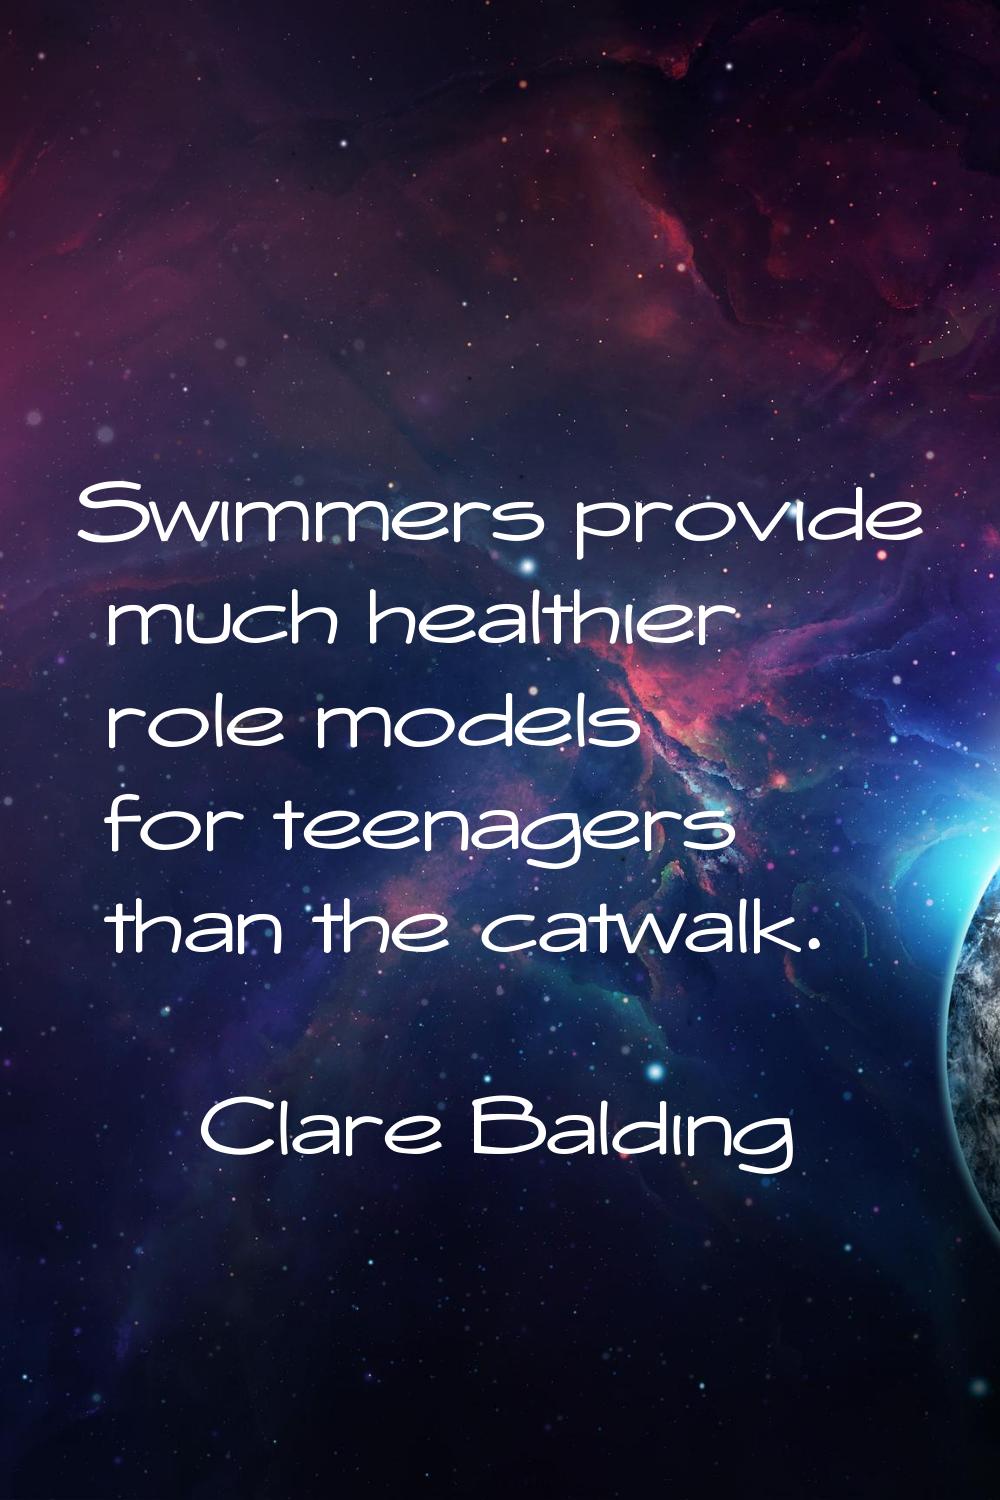 Swimmers provide much healthier role models for teenagers than the catwalk.